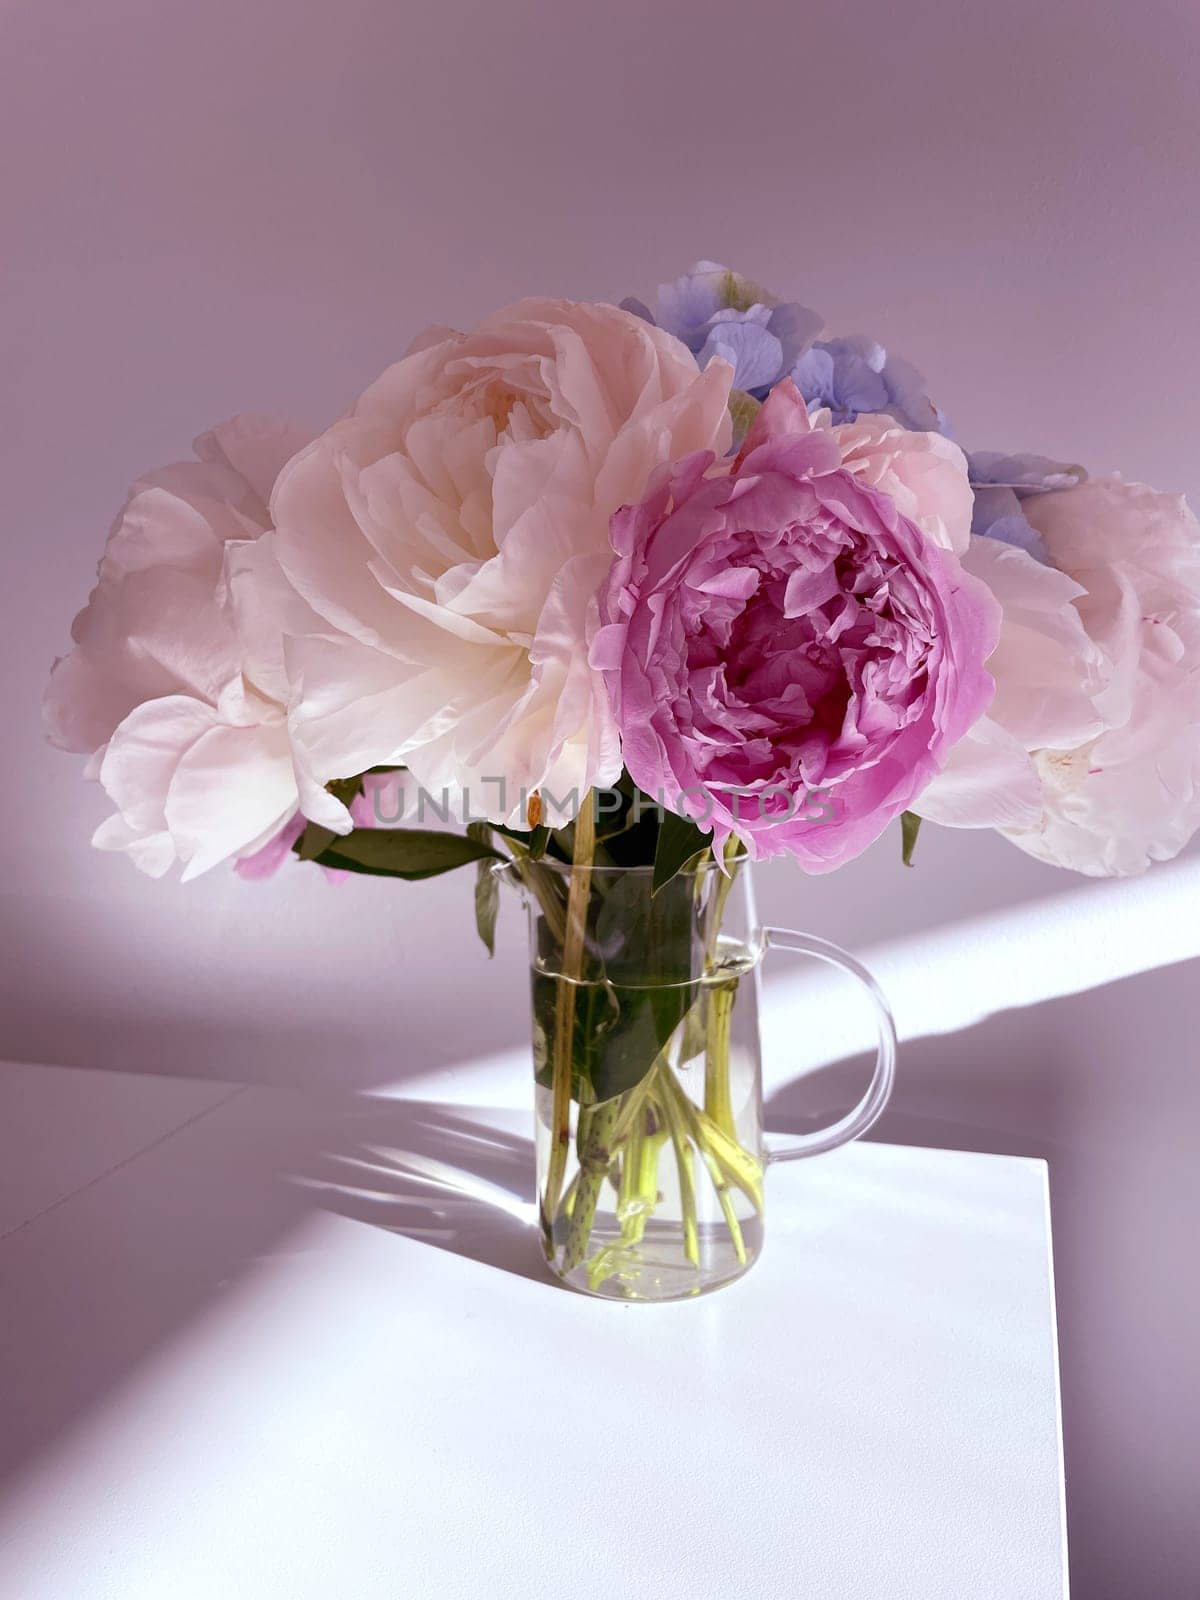 A bouquet of blooming white and pink peonies of delicate color by MilaLazo